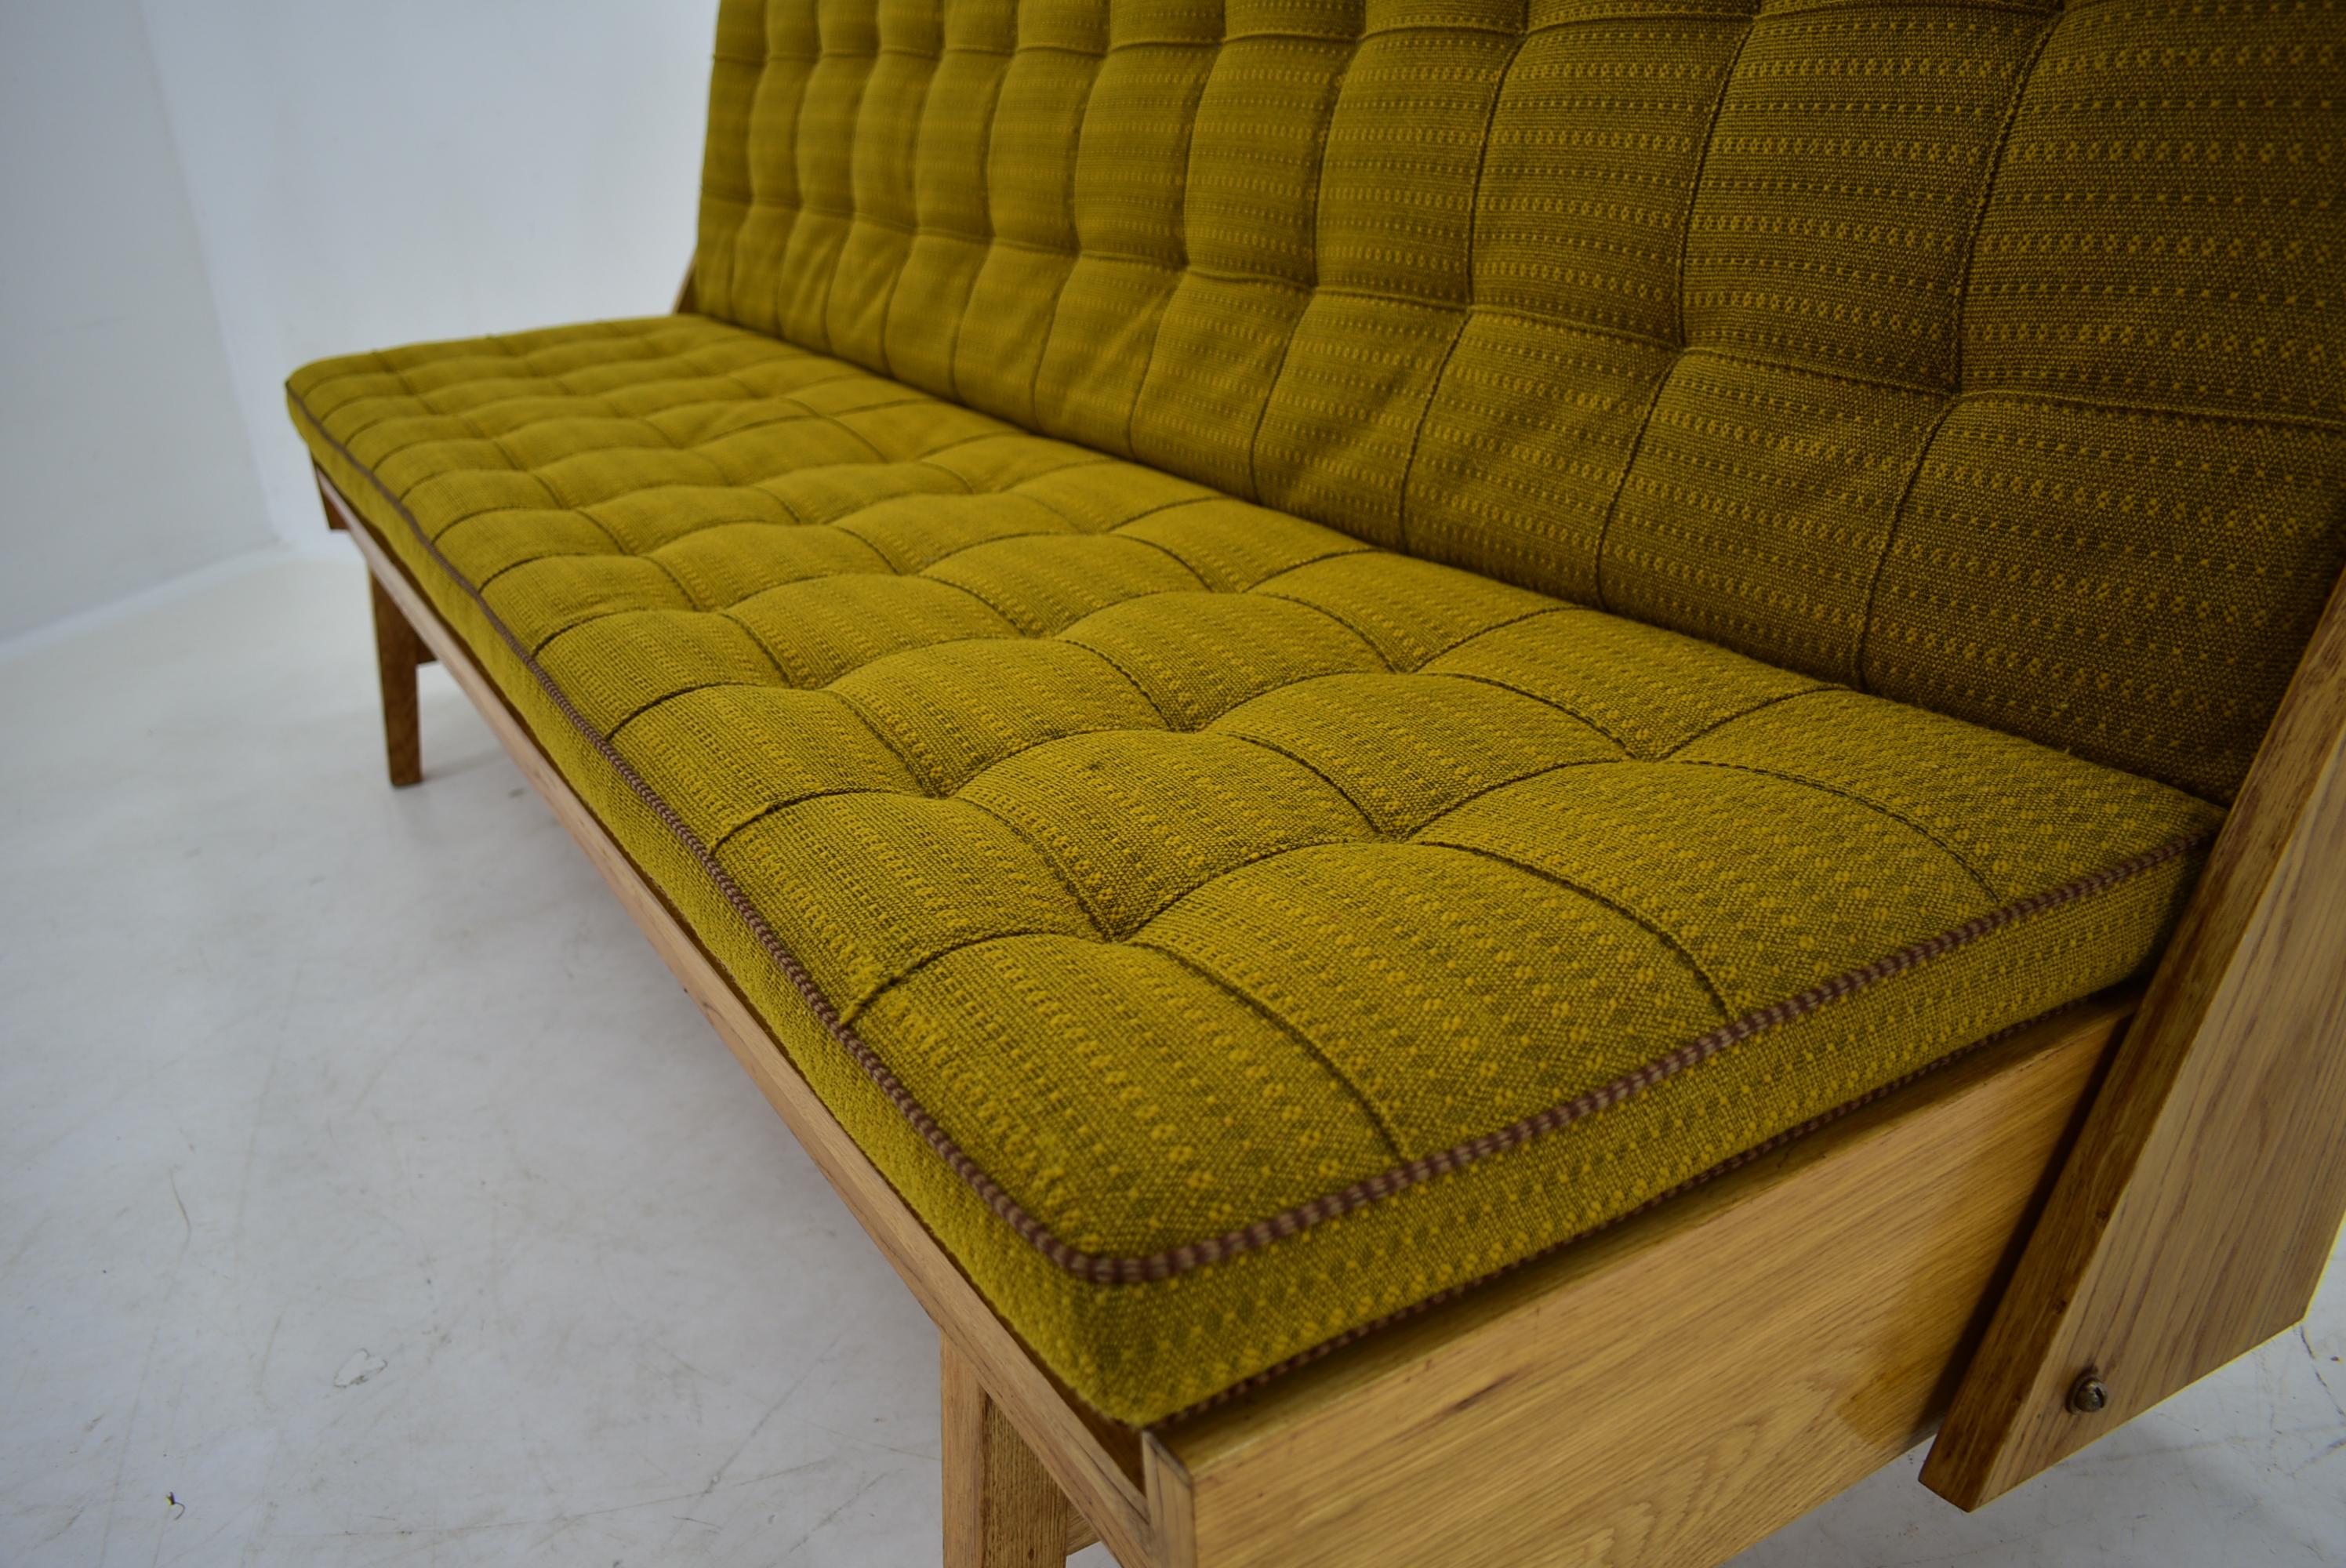 Mid-century folding sofa or daybed, 1960's.
Made in Czechoslovakia
Made of fabric, wood
Good original condition.
Cleaned
When unfolded, size 87cm
Seat Height 43cm
